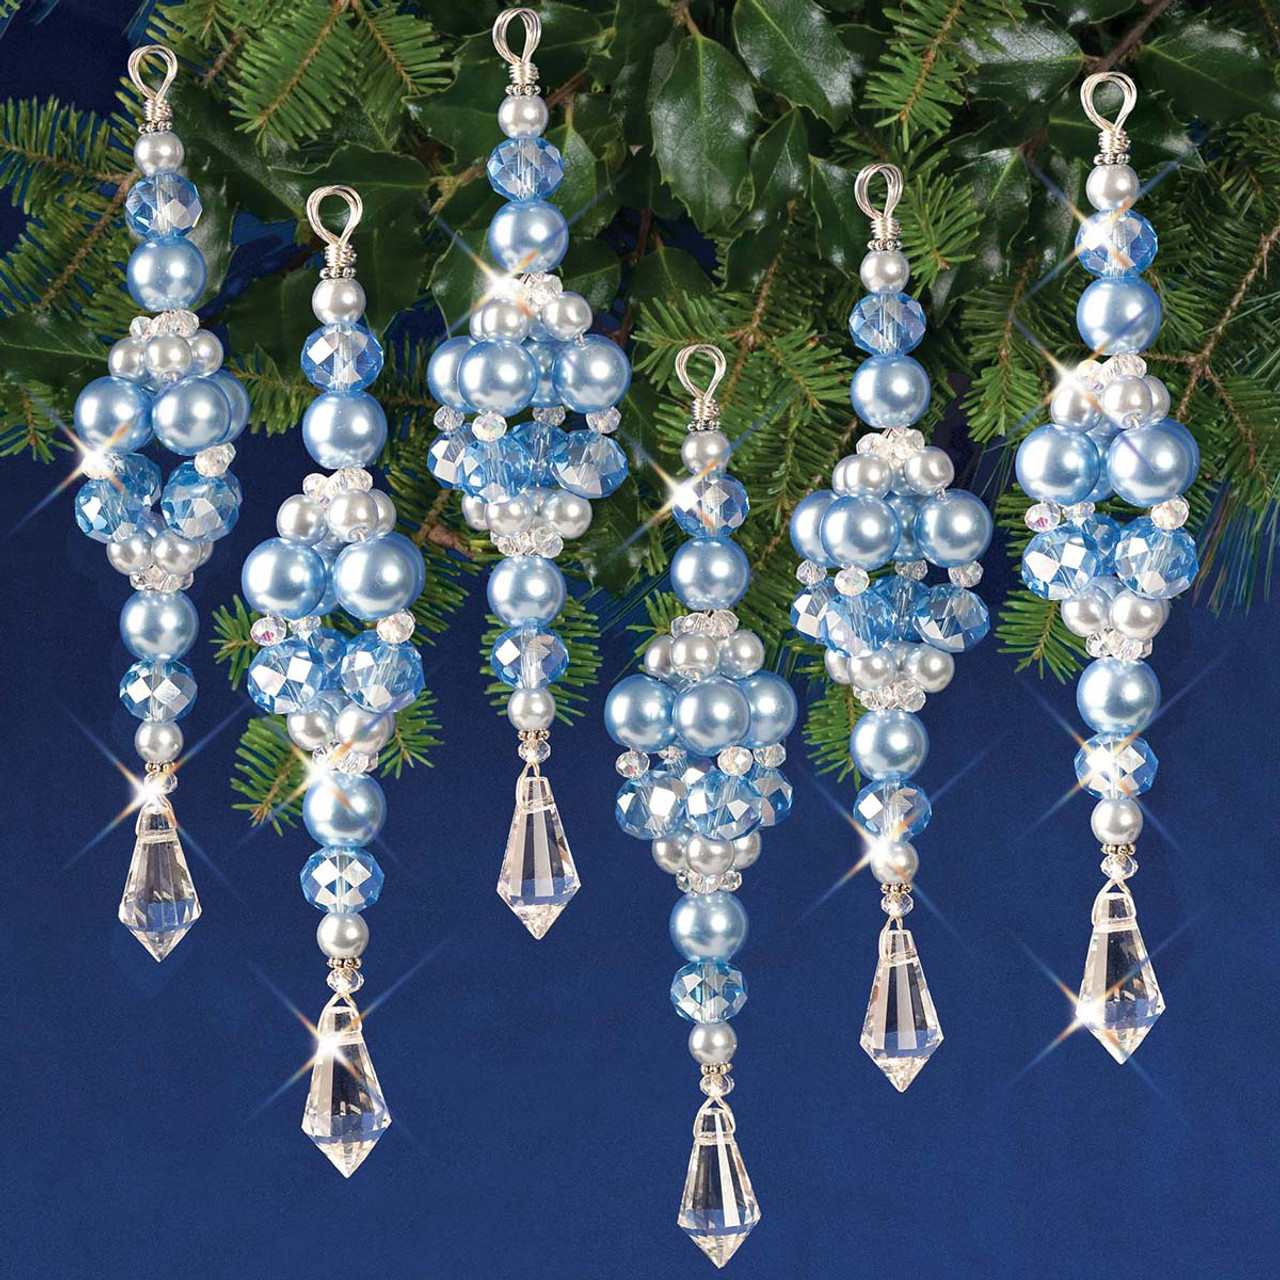 Blue Square Earrings Ornament - Seed Bead Embroidery Kit